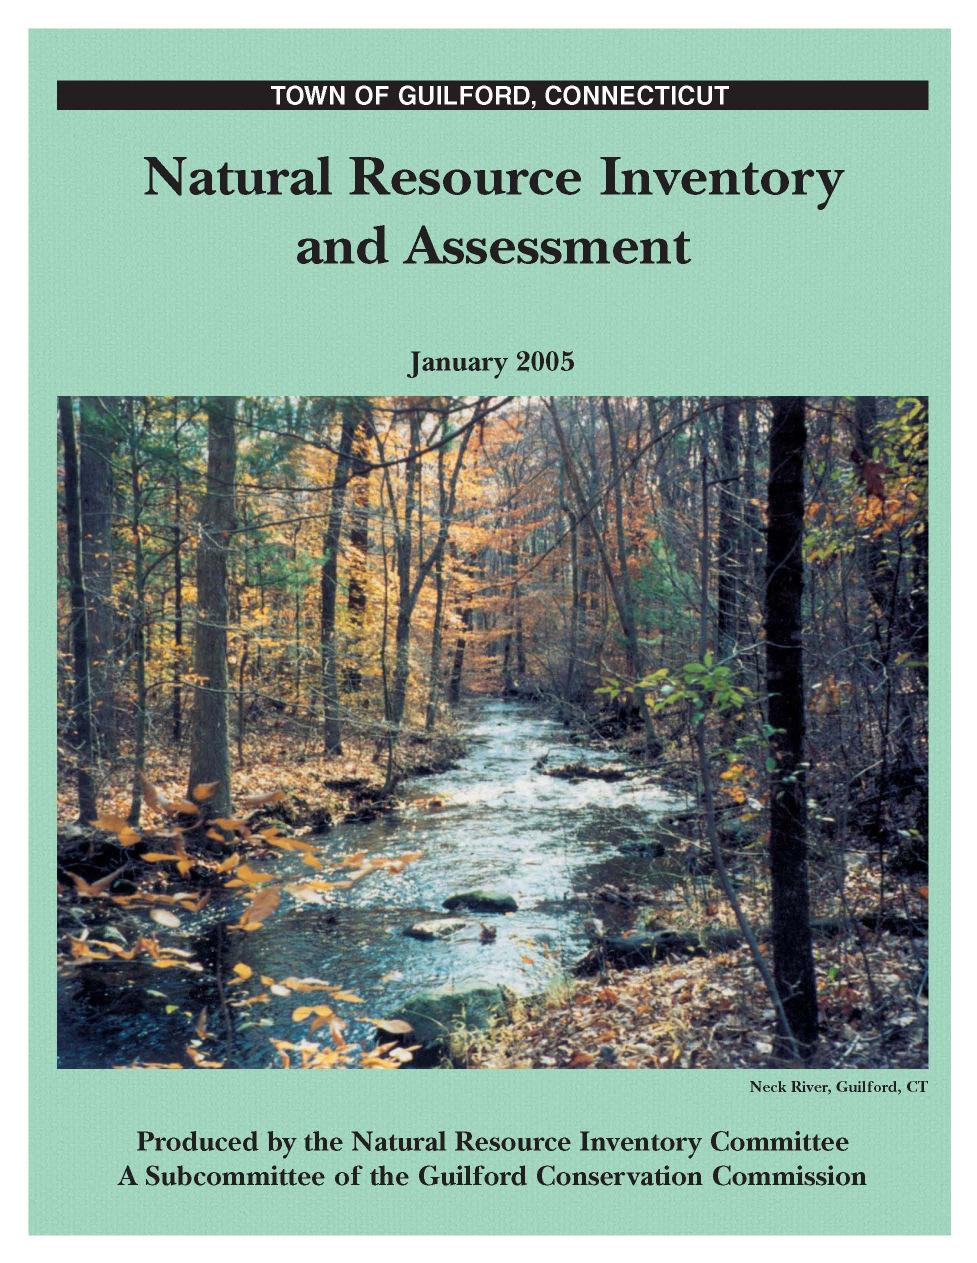 Produced by the Natural Resource Inventory Committee, the Natural Resources Inventory and Assessment establishes an information baseline toward enhancing the Town's ability to formulate sound land